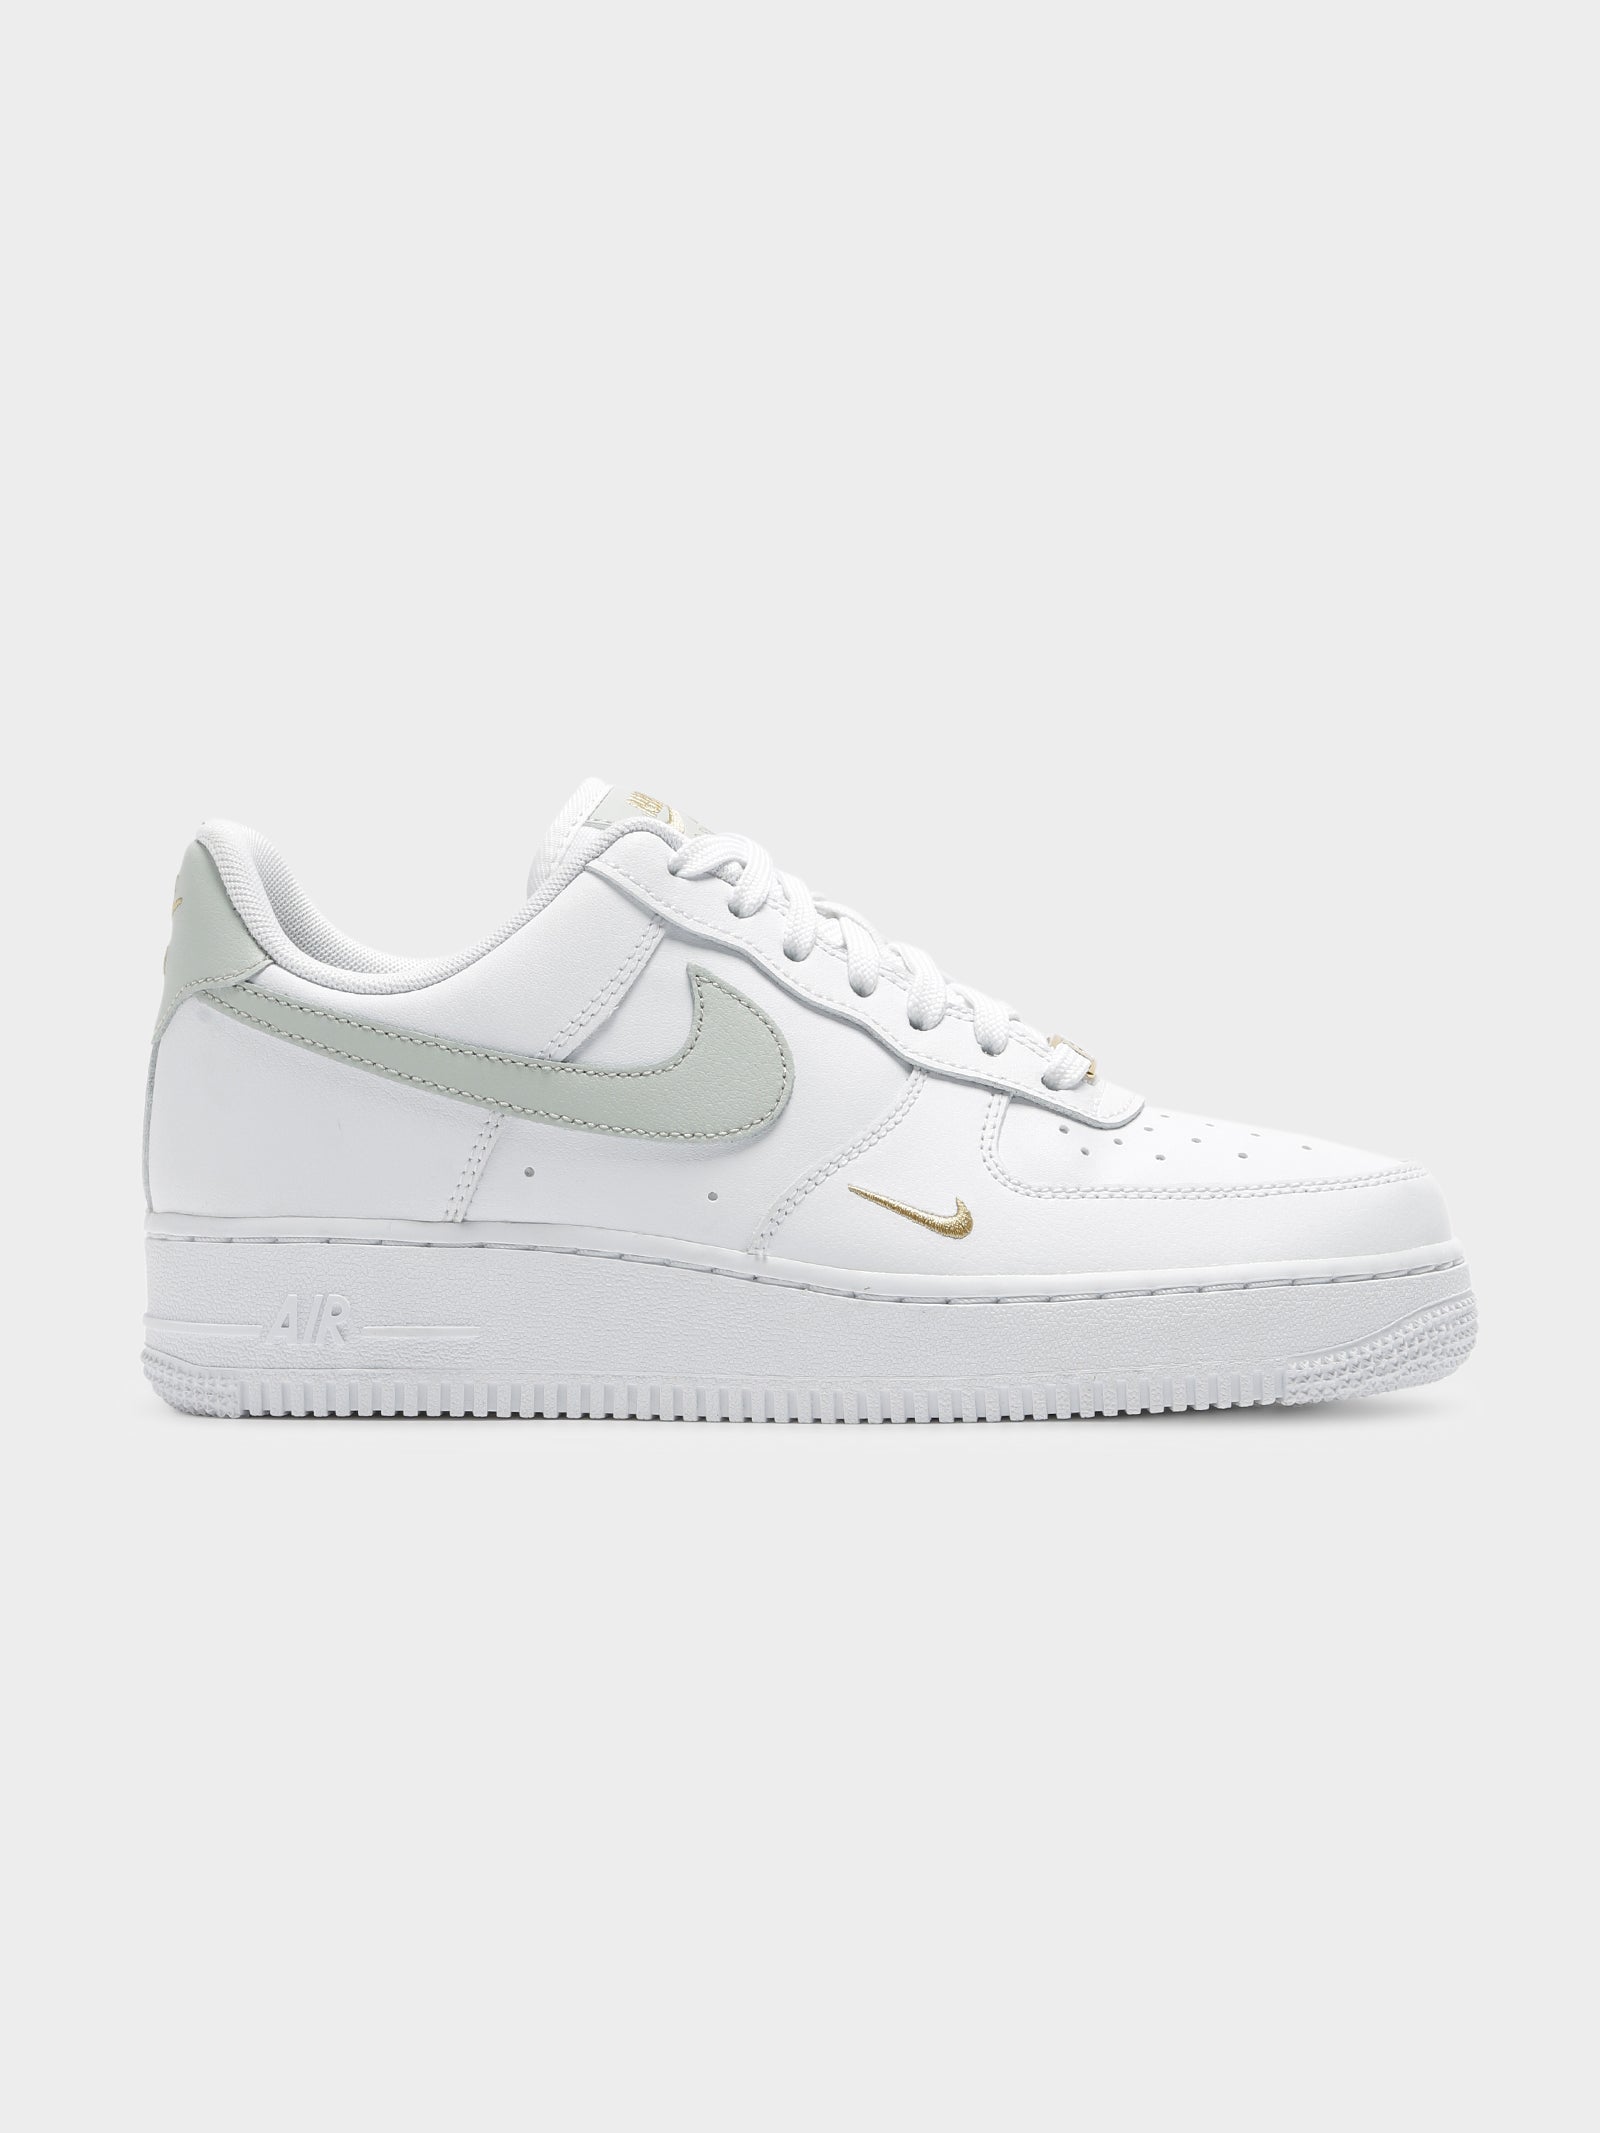 white air force ones womens size 7